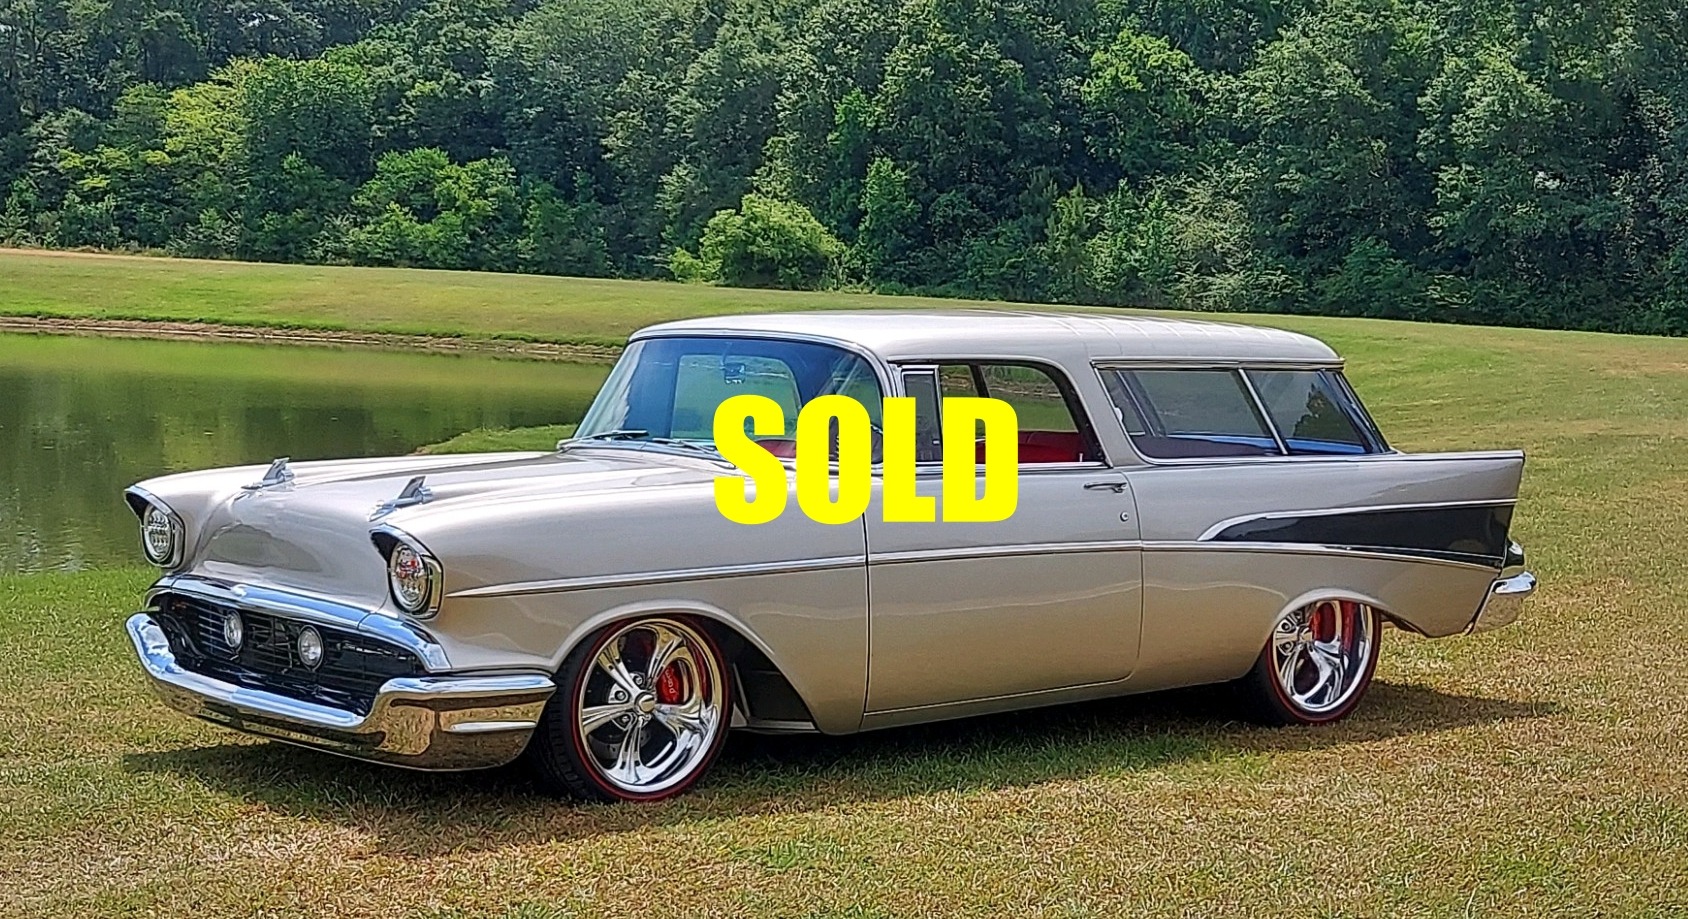 Used 1957 Chevrolet Nomad  209 , For Sale $225000, Call Us: (704) 996-3735